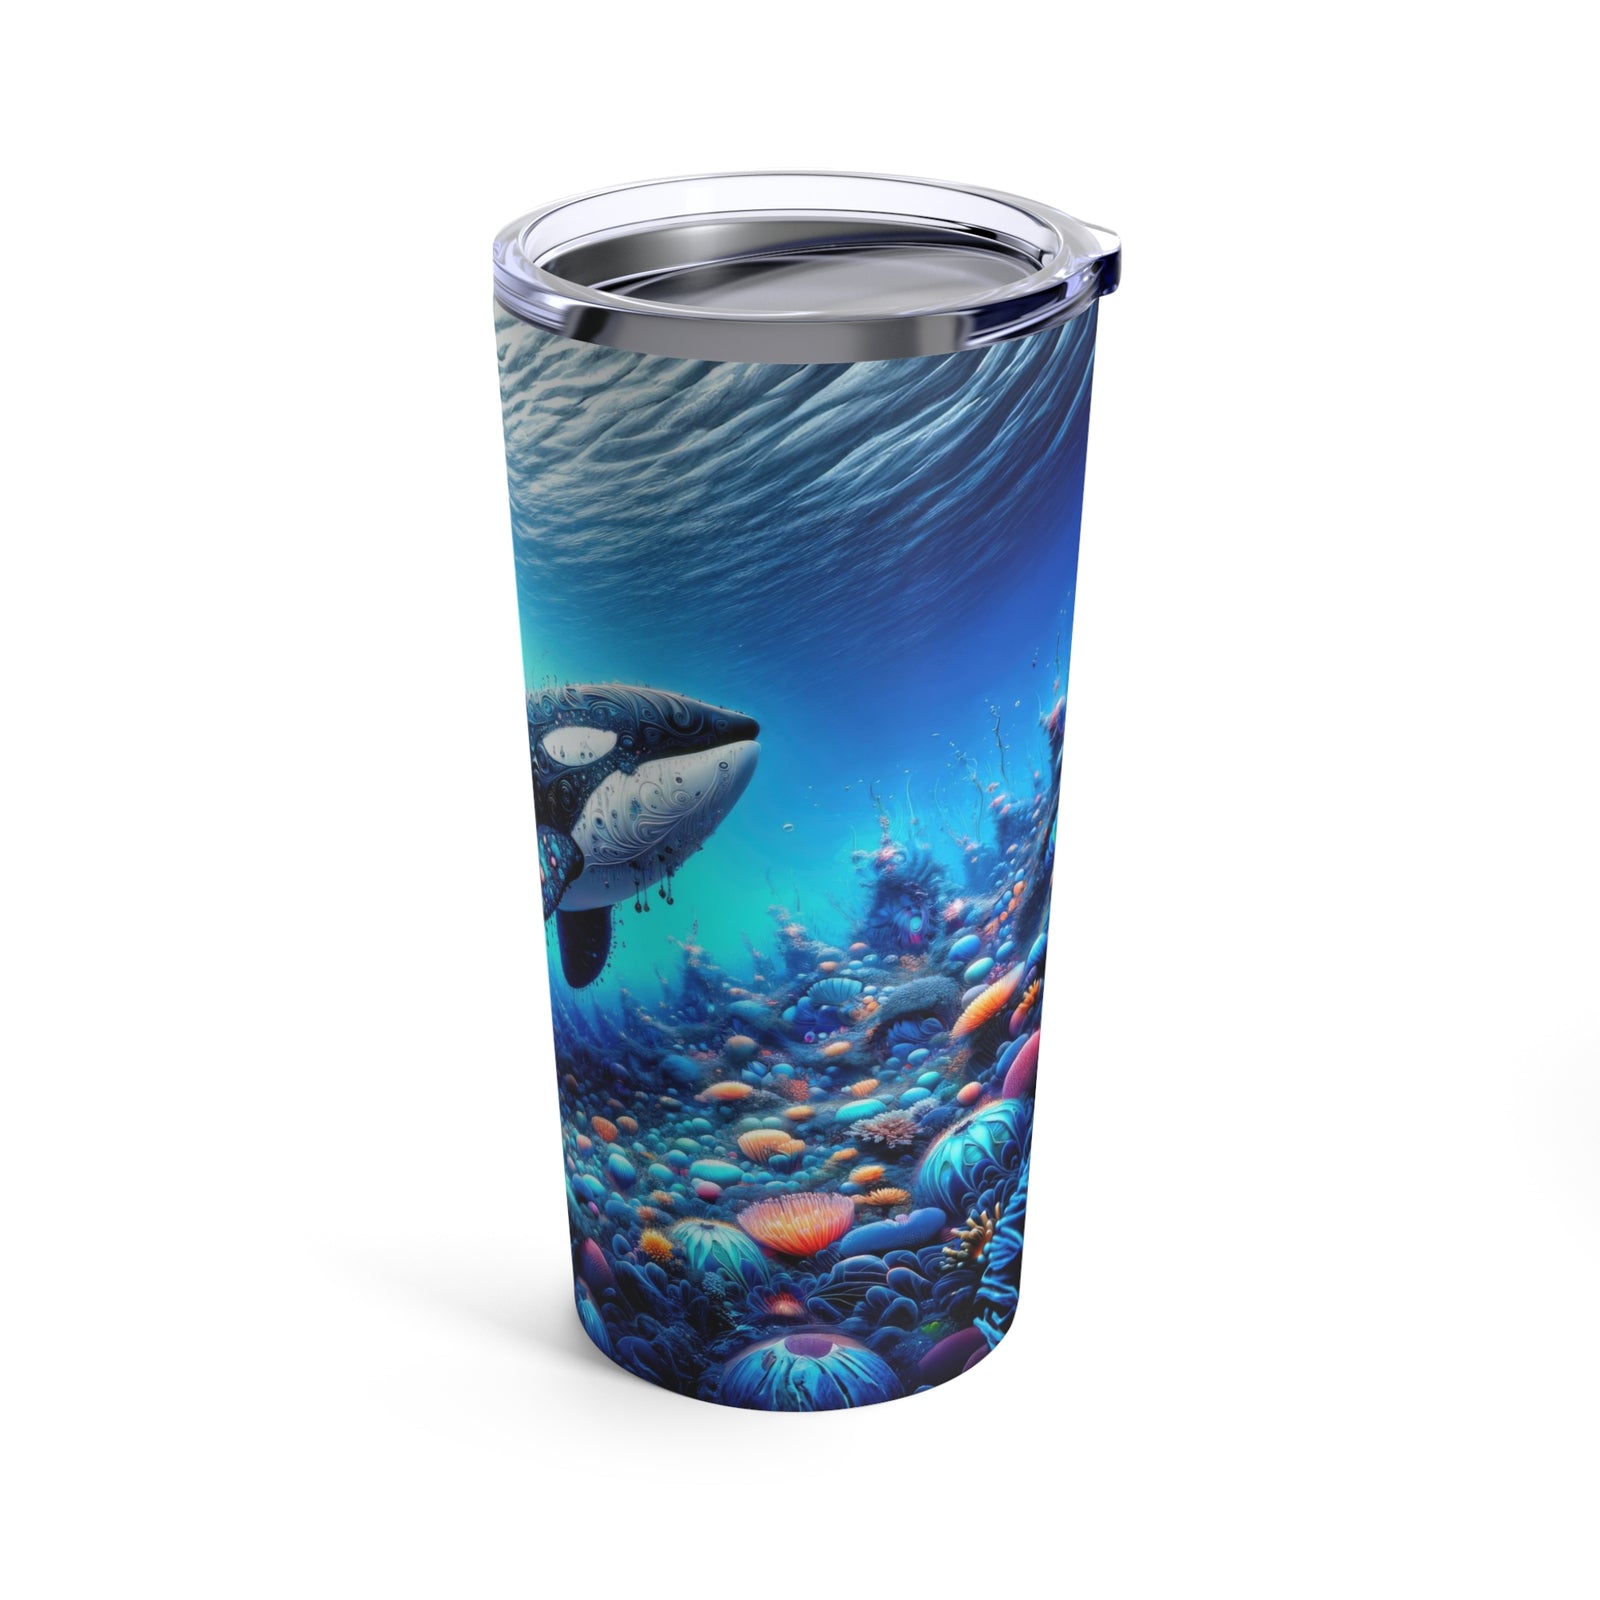 Whispers of the Whorled Waters Tumbler 20oz